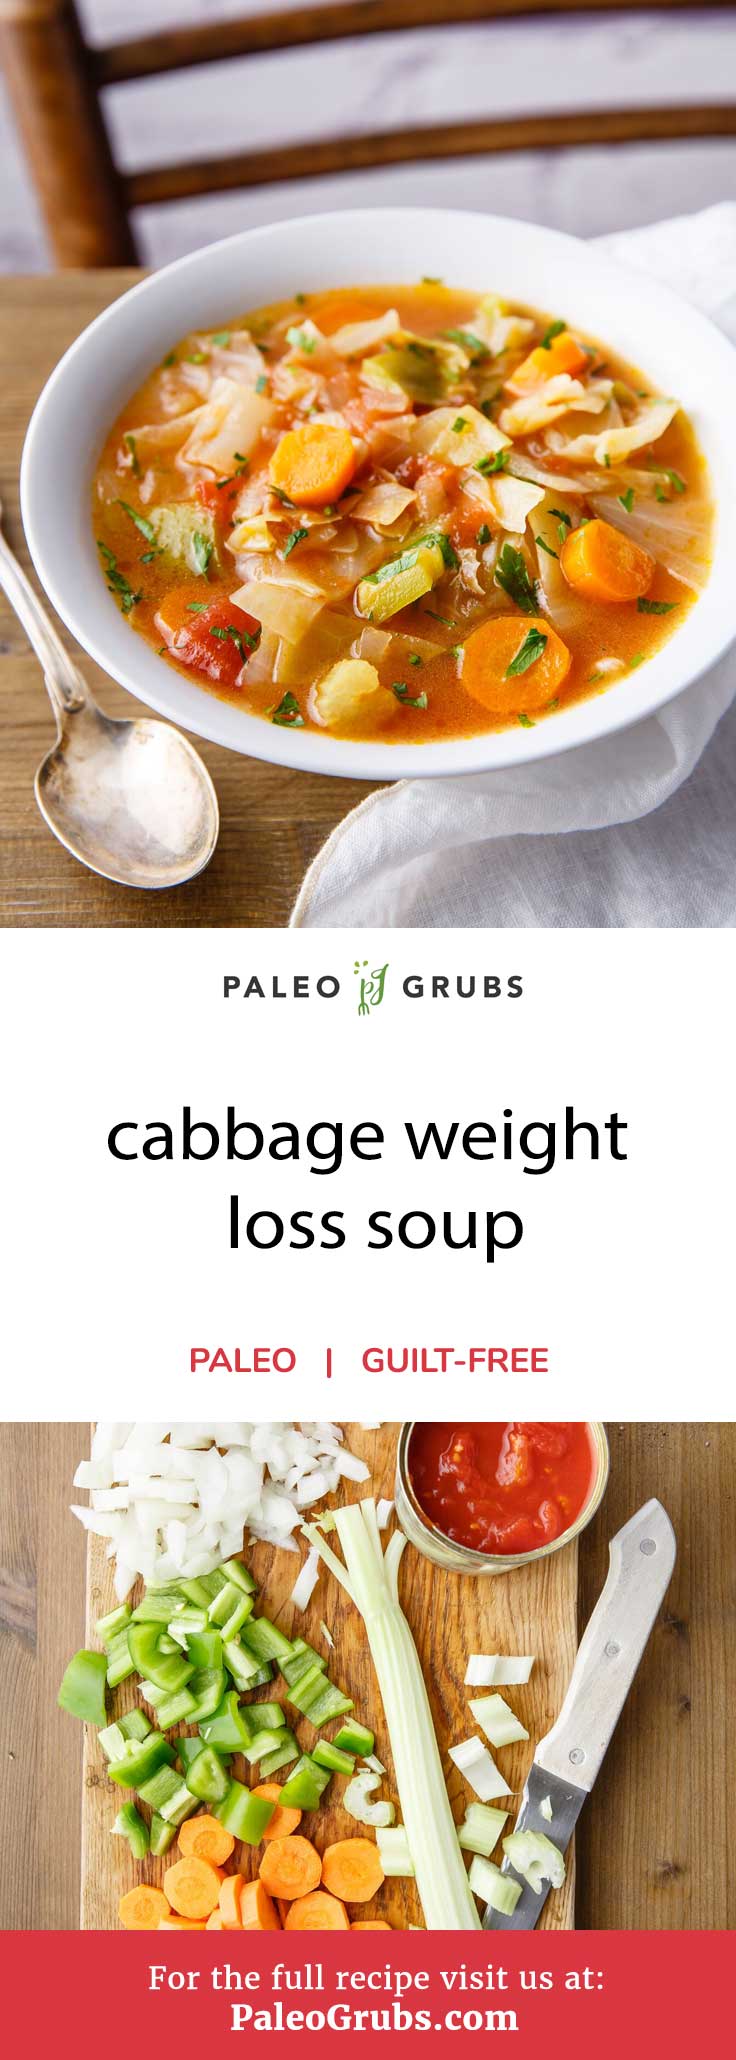 This nutrient-dense homemade cabbage weight loss soup is a fantastic way to help you lose some of those extra pounds you’ve been looking to drop. Using a variety of garden vegetables, your choice of chicken or beef broth, and some delicious herbs and spices like cumin and parsley, it’s ideal for anyone trying to keep their calories low while still making sure they get an adequate intake of vitamins and minerals.